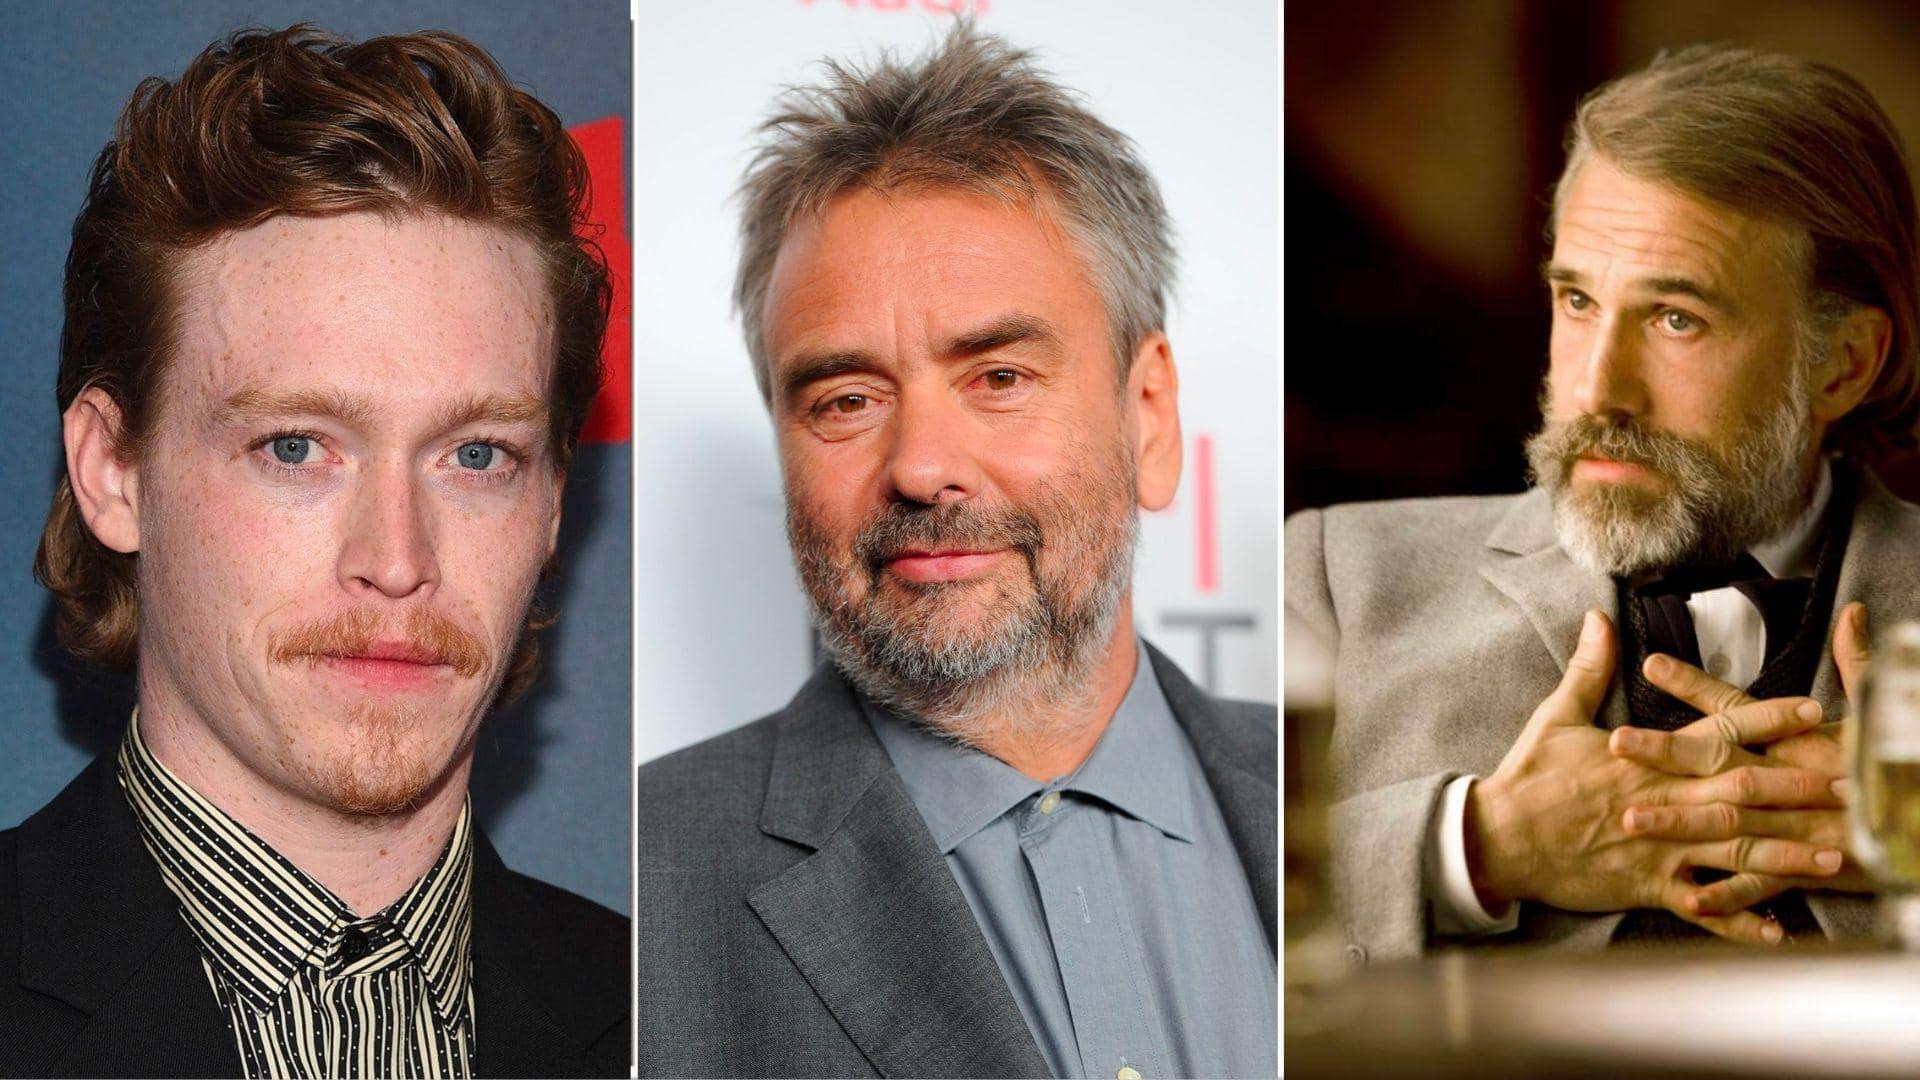 Luc Besson to direct 'Dracula' adaptation starring Christoph Waltz: Report